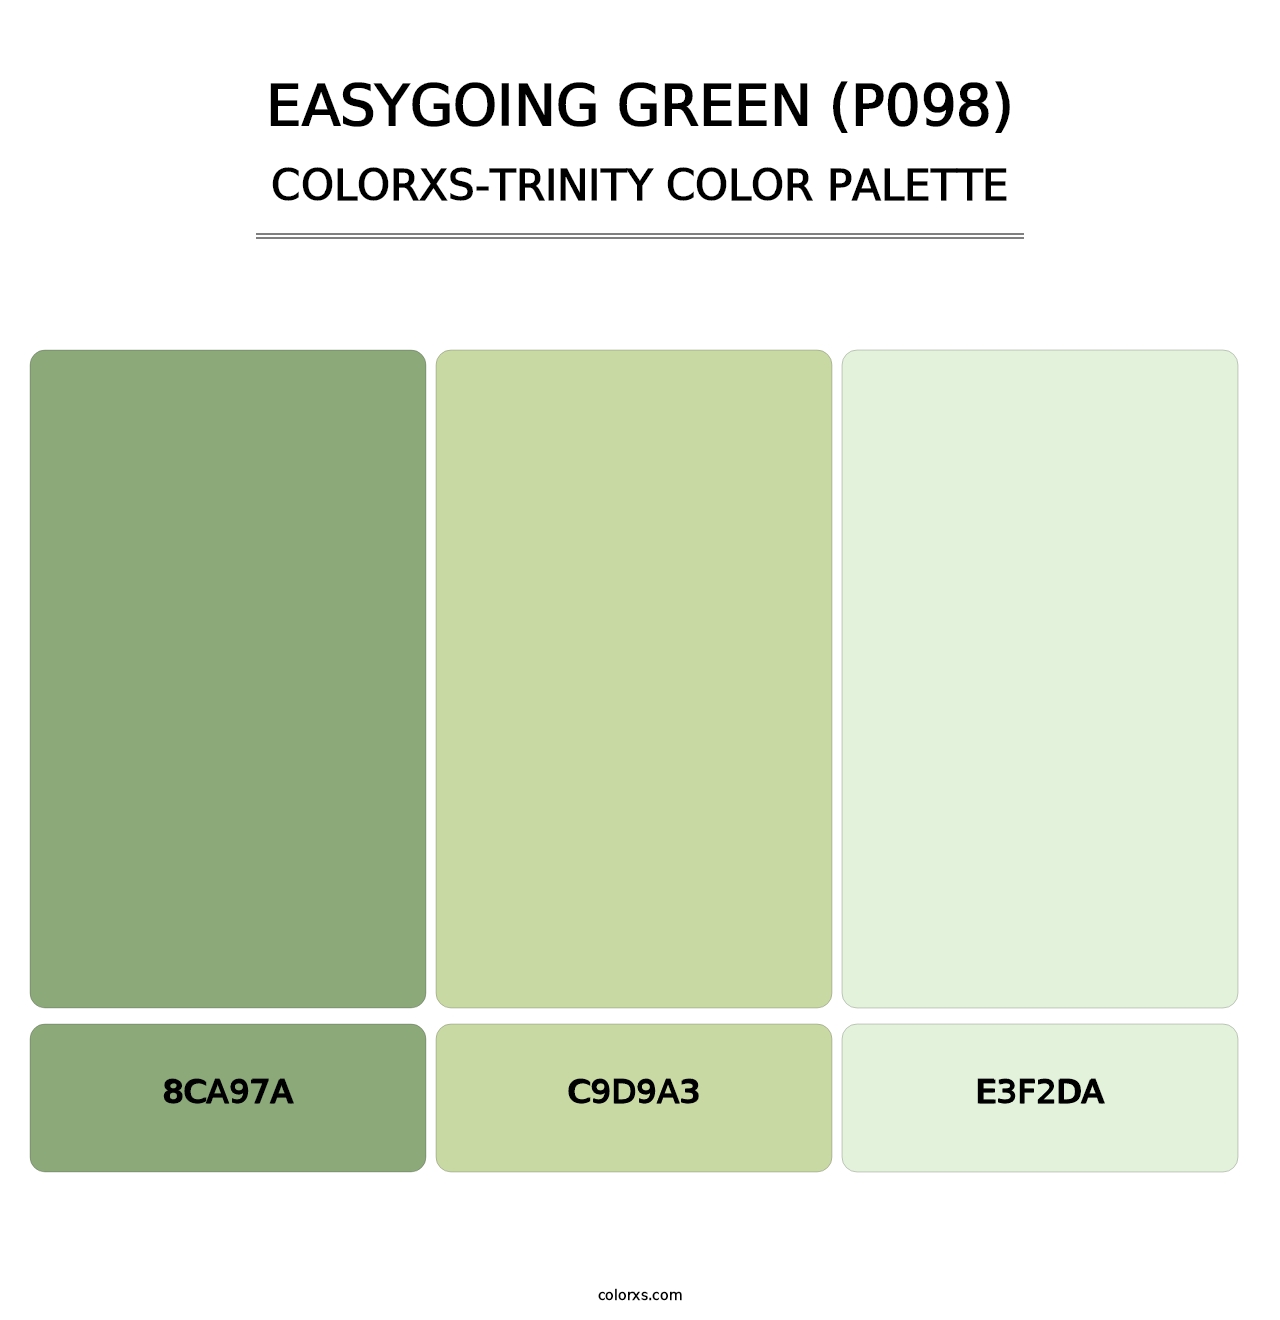 Easygoing Green (P098) - Colorxs Trinity Palette